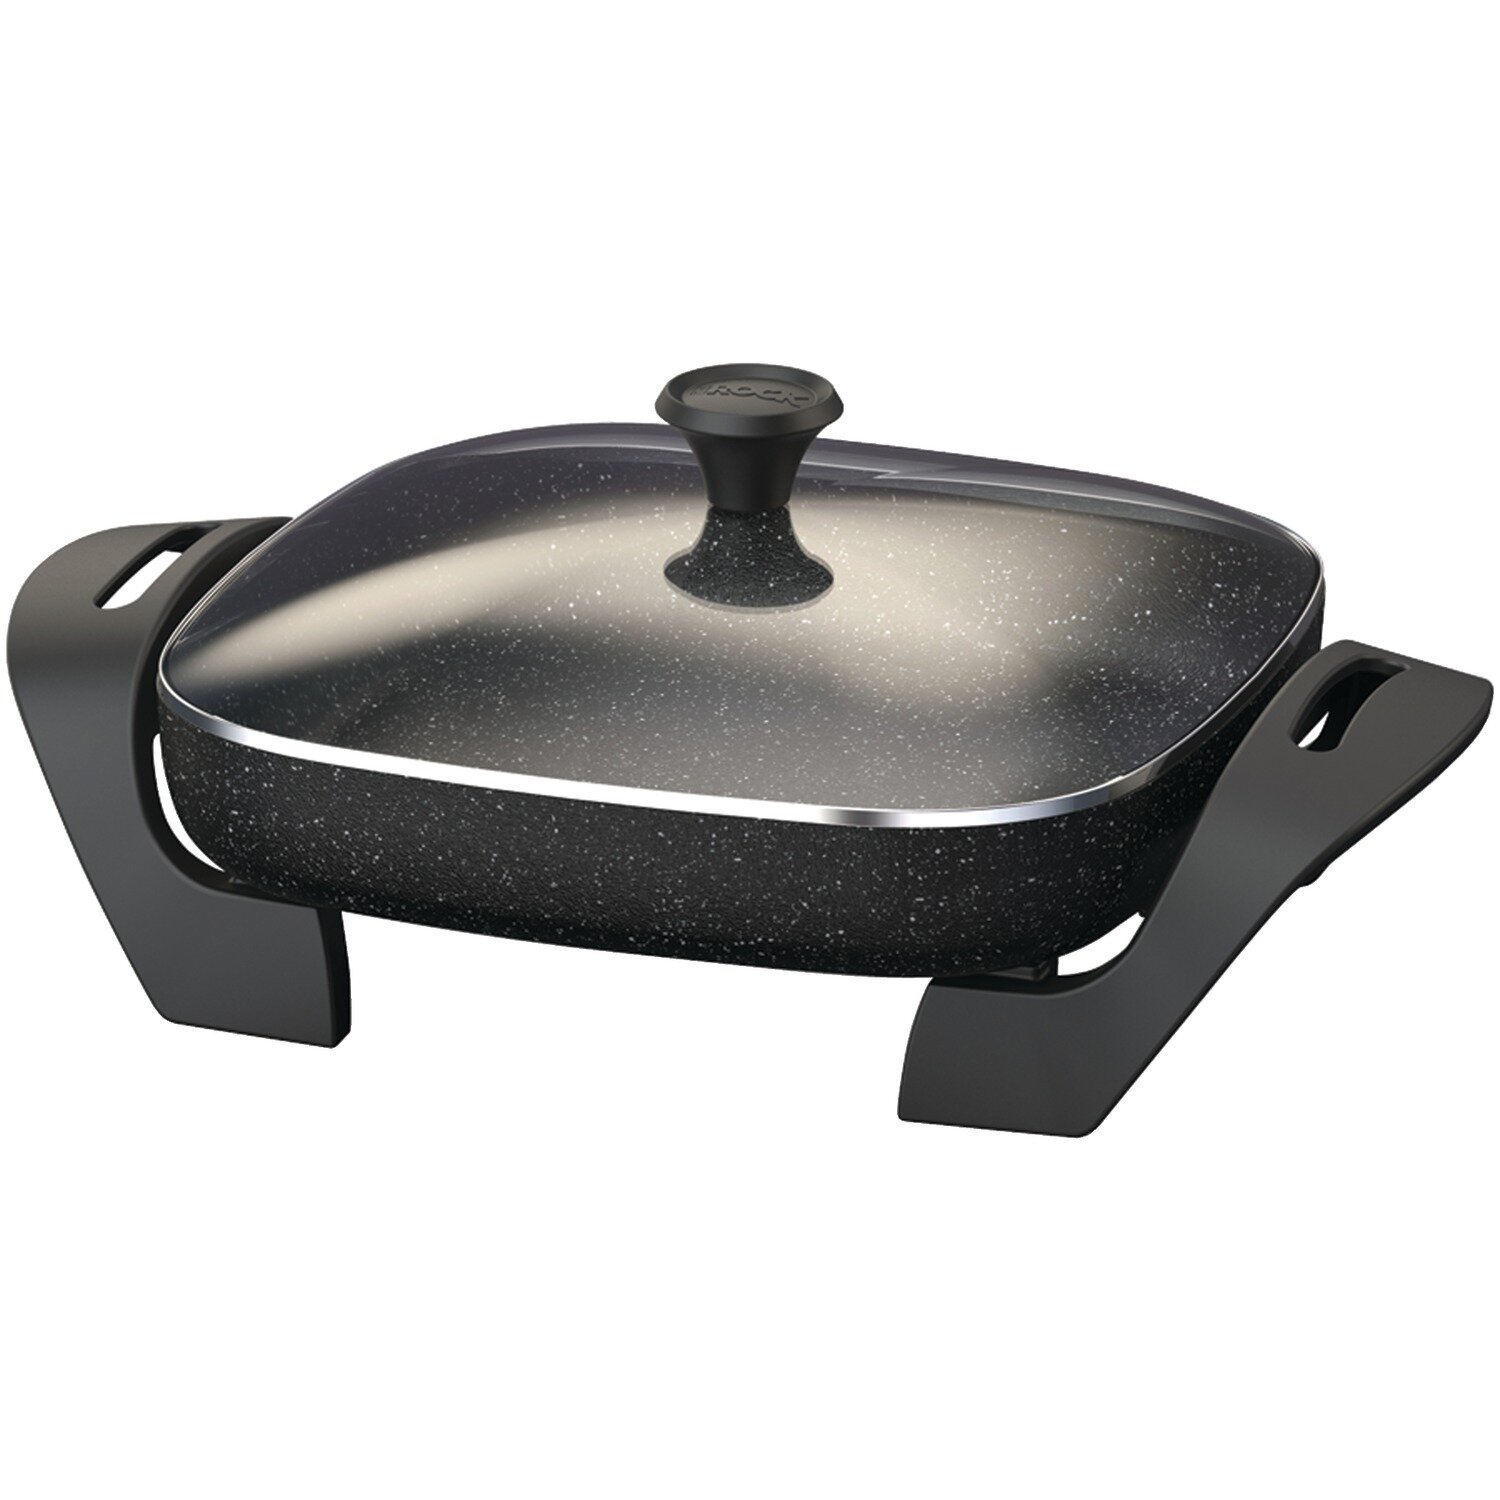 Starfrit The Rock 11-in. N.S. Deep Fry Pan with Lid